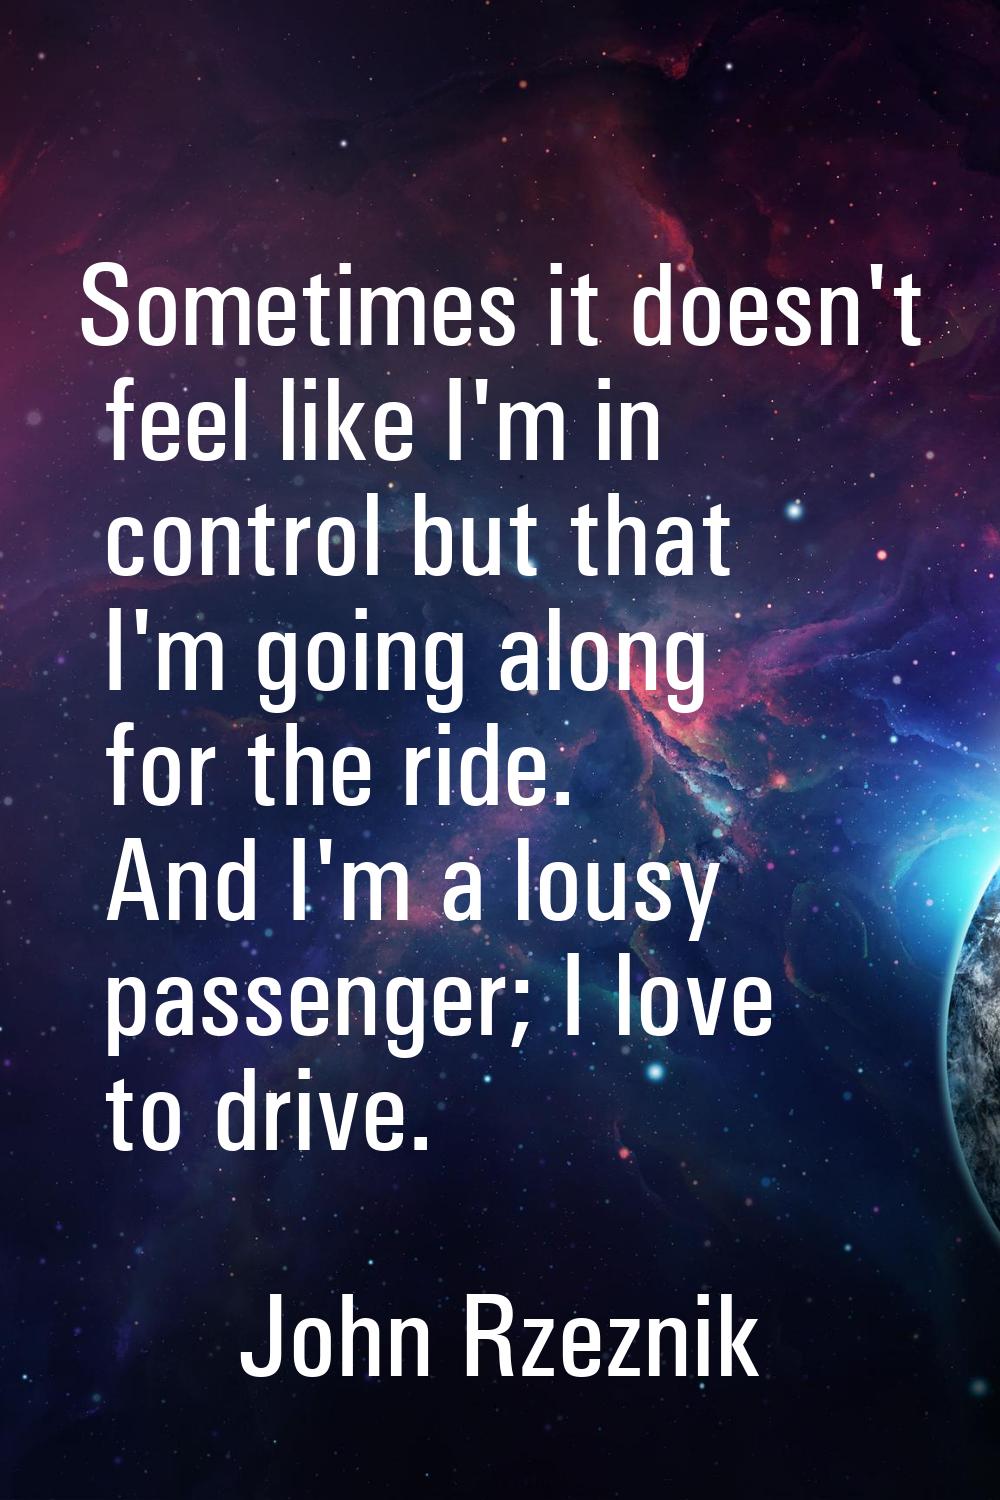 Sometimes it doesn't feel like I'm in control but that I'm going along for the ride. And I'm a lous